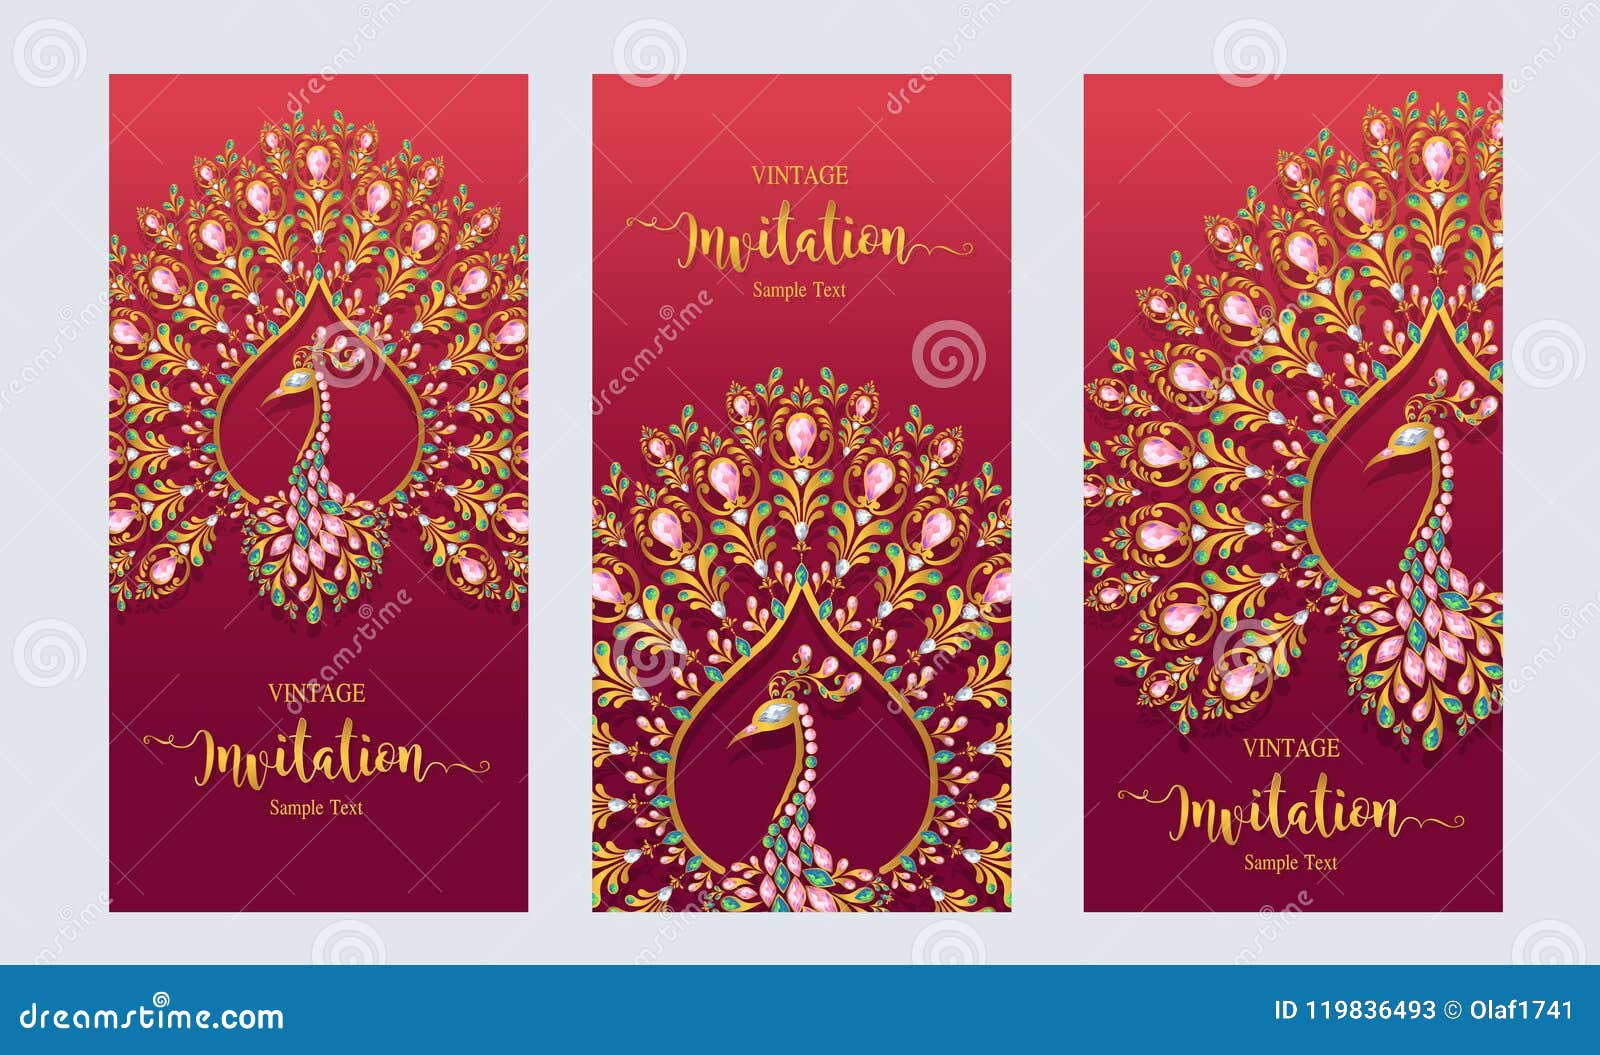 Wedding Invitation Card Templates . Stock Vector - Illustration of Throughout Indian Wedding Cards Design Templates